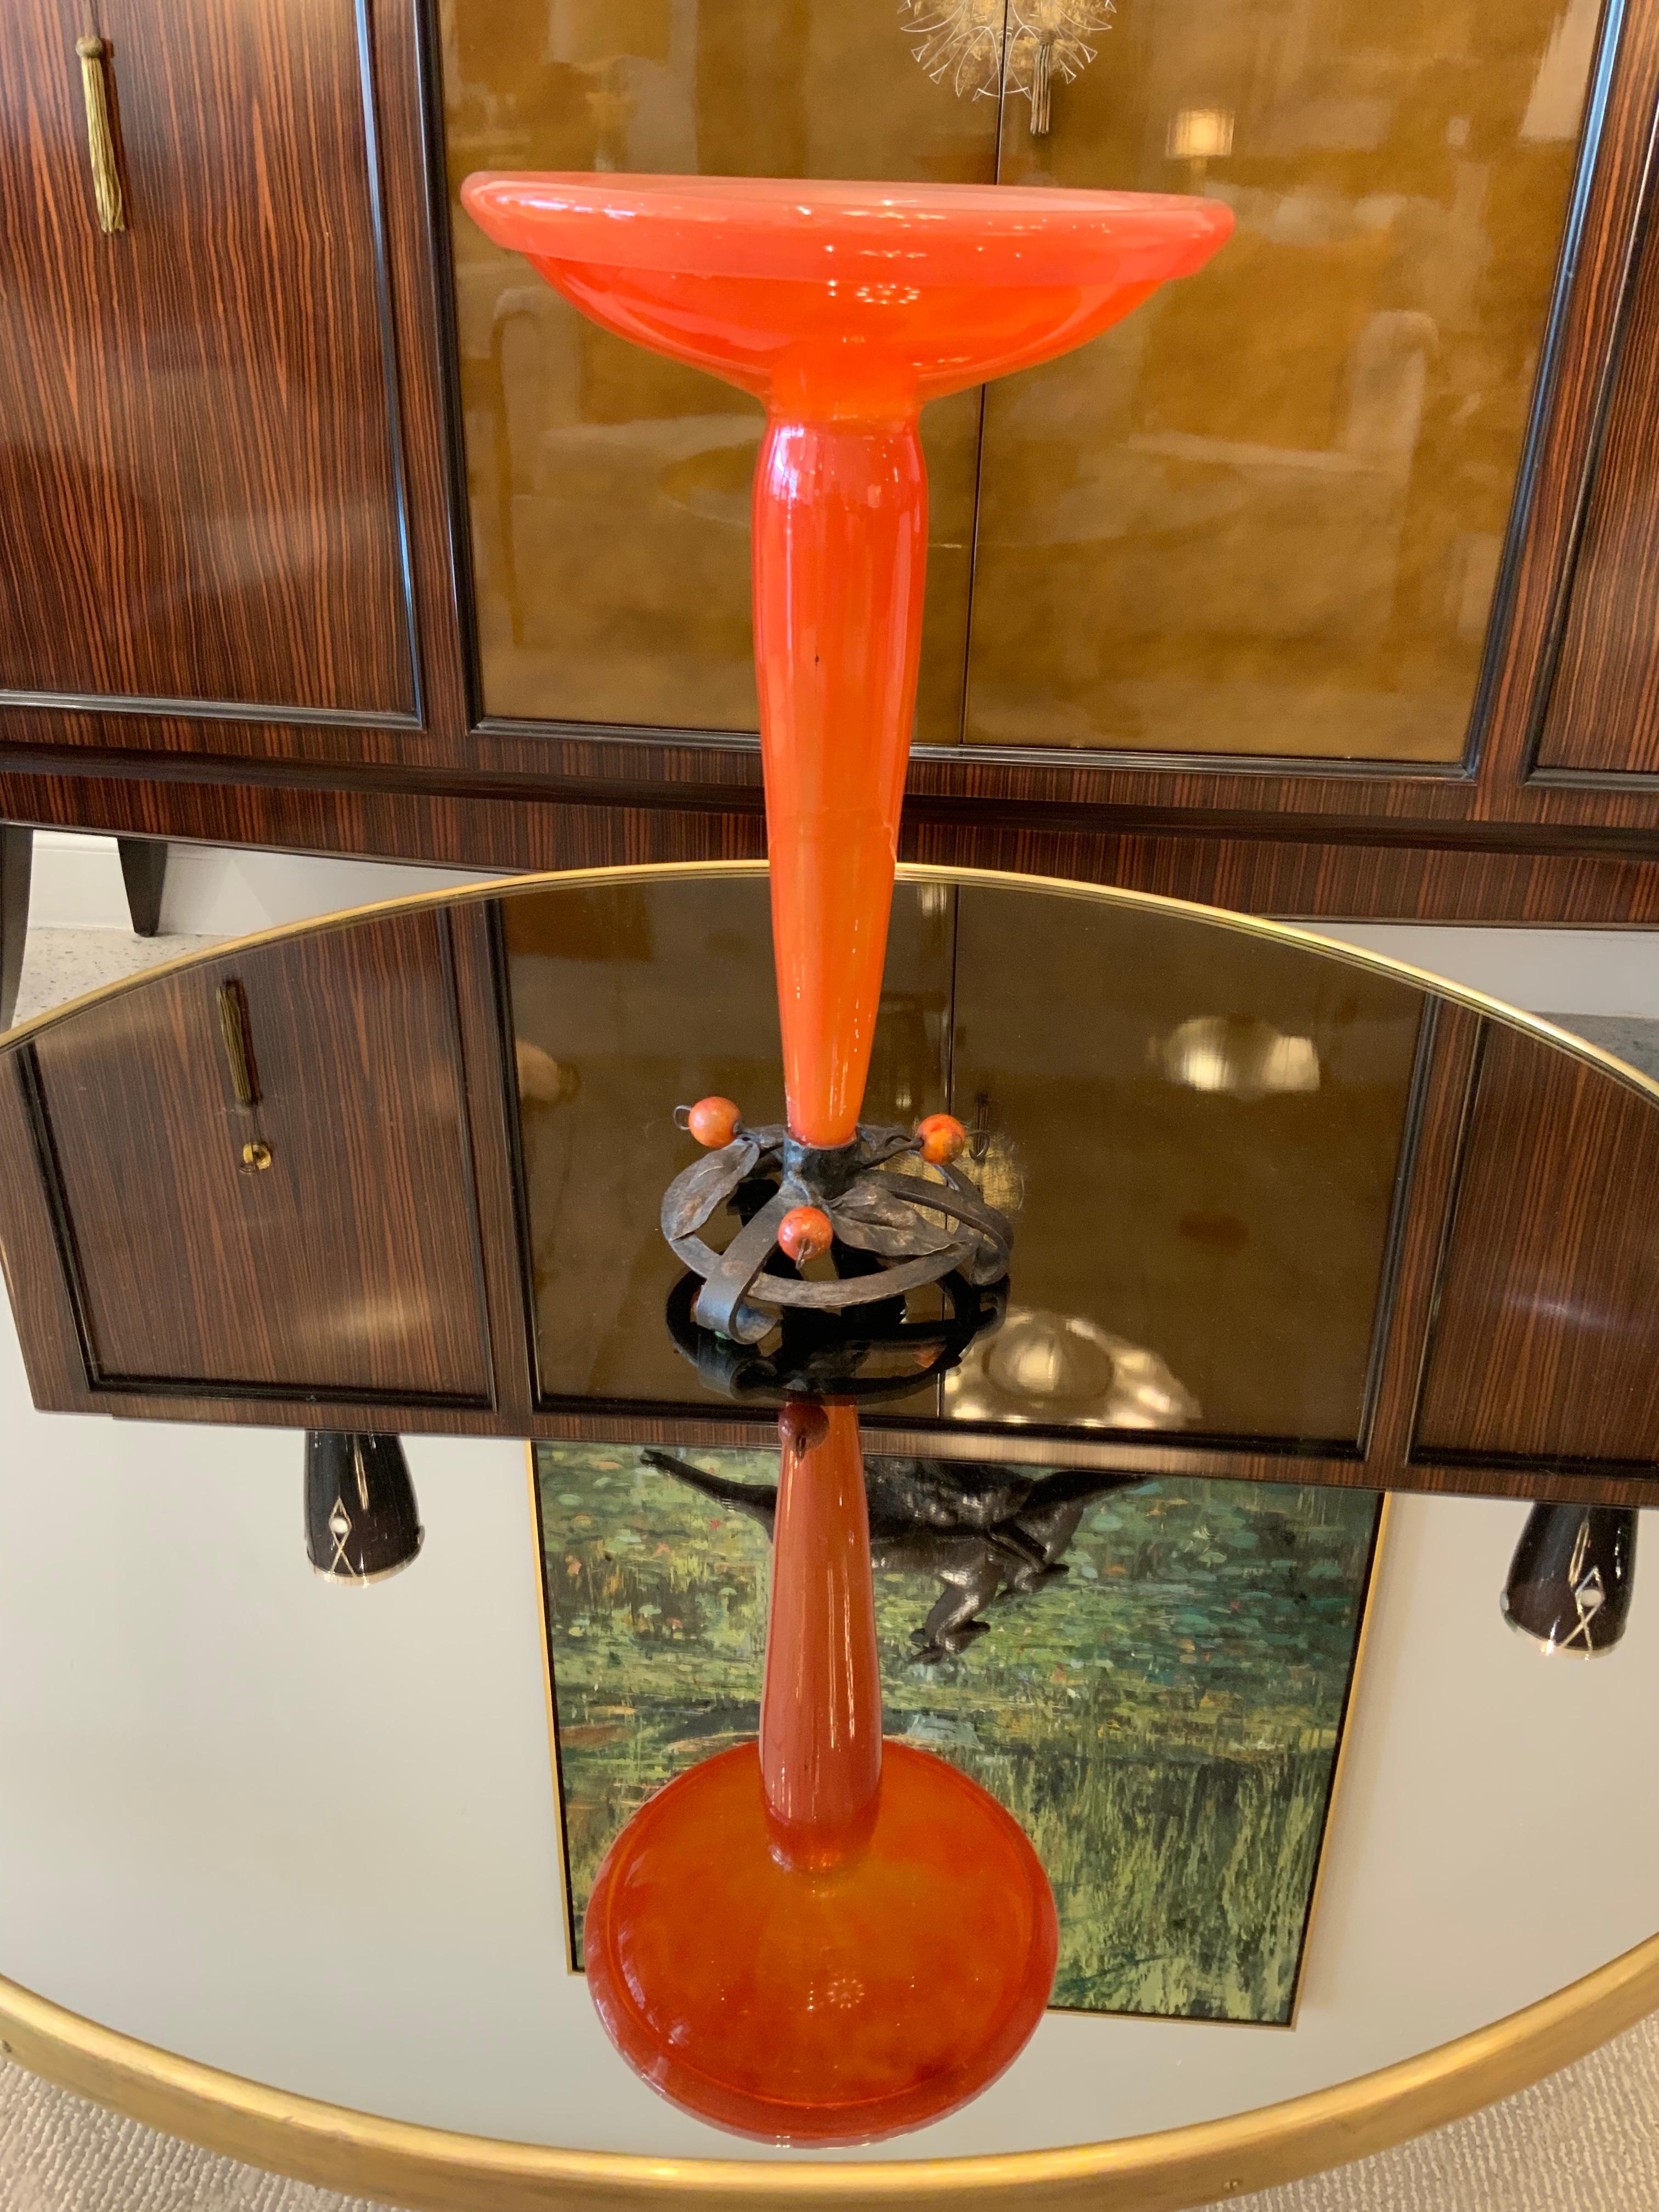 A beautiful Art Deco glass vase by Charles Schneider in a red tango colored with wrought iron details.
Signed: Schneider.